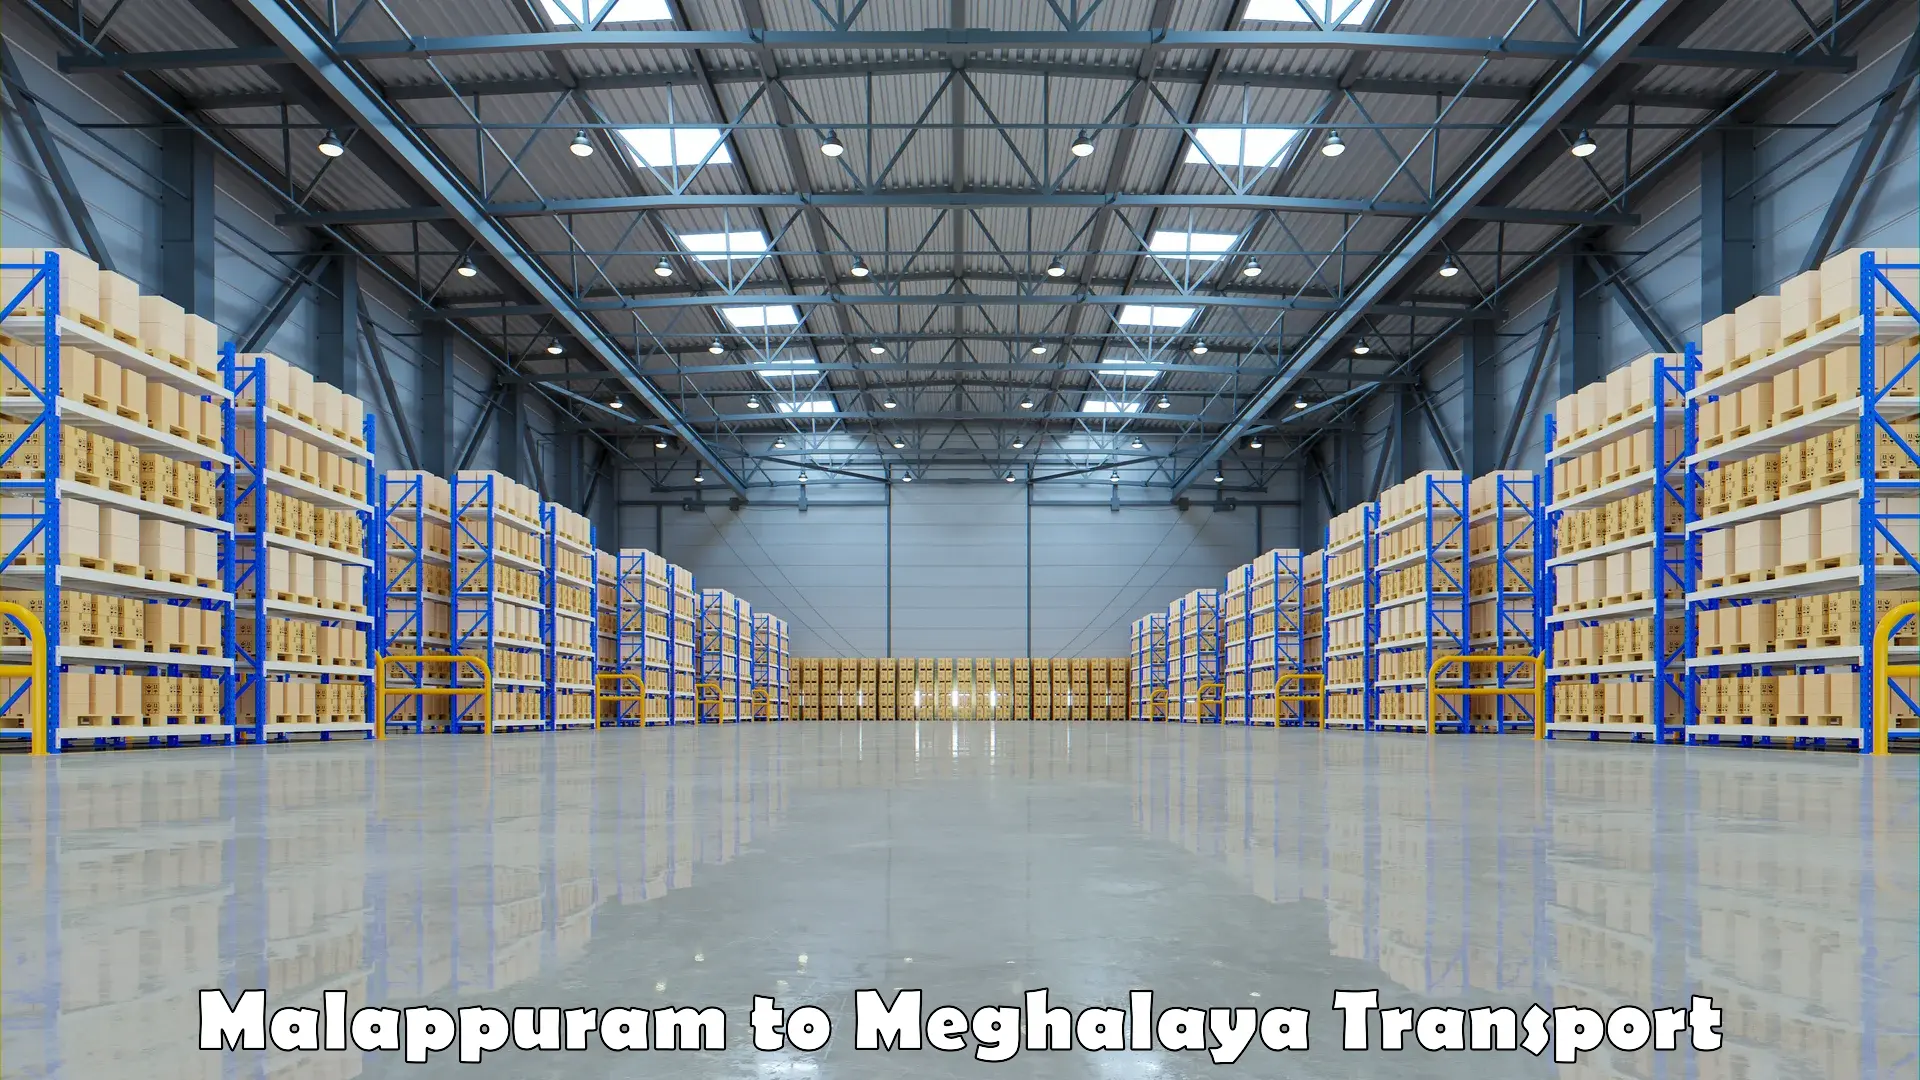 Transport bike from one state to another Malappuram to Meghalaya